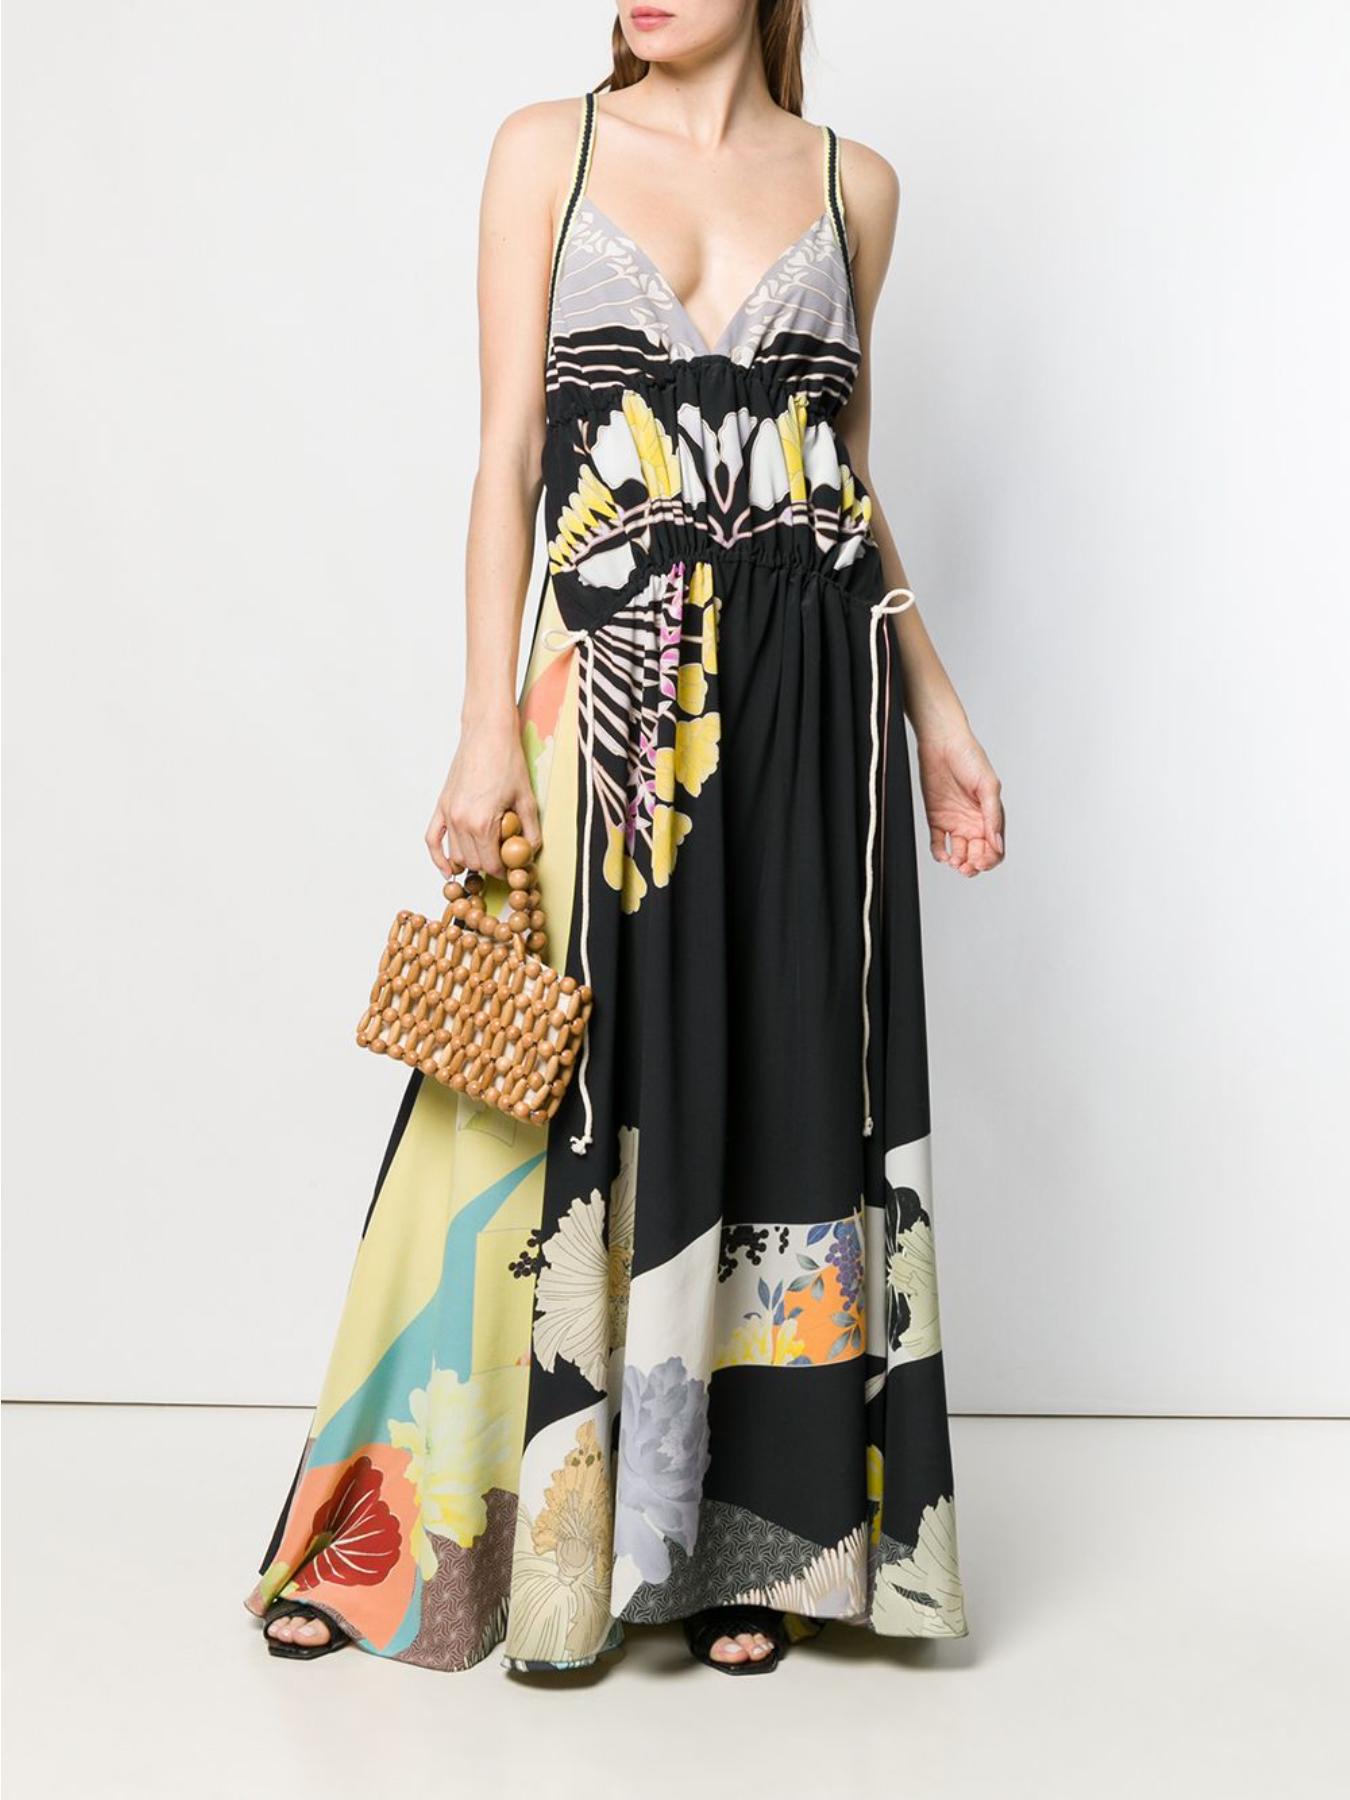 This Etro Spring 2019 runway multicolored silk floral print maxi dress features a sleeveless design, a v-neckline, back crisscross straps, an empire waist, a flared skirt and double drawstring. Brand new with tags. Made in Italy. 

Size: 40